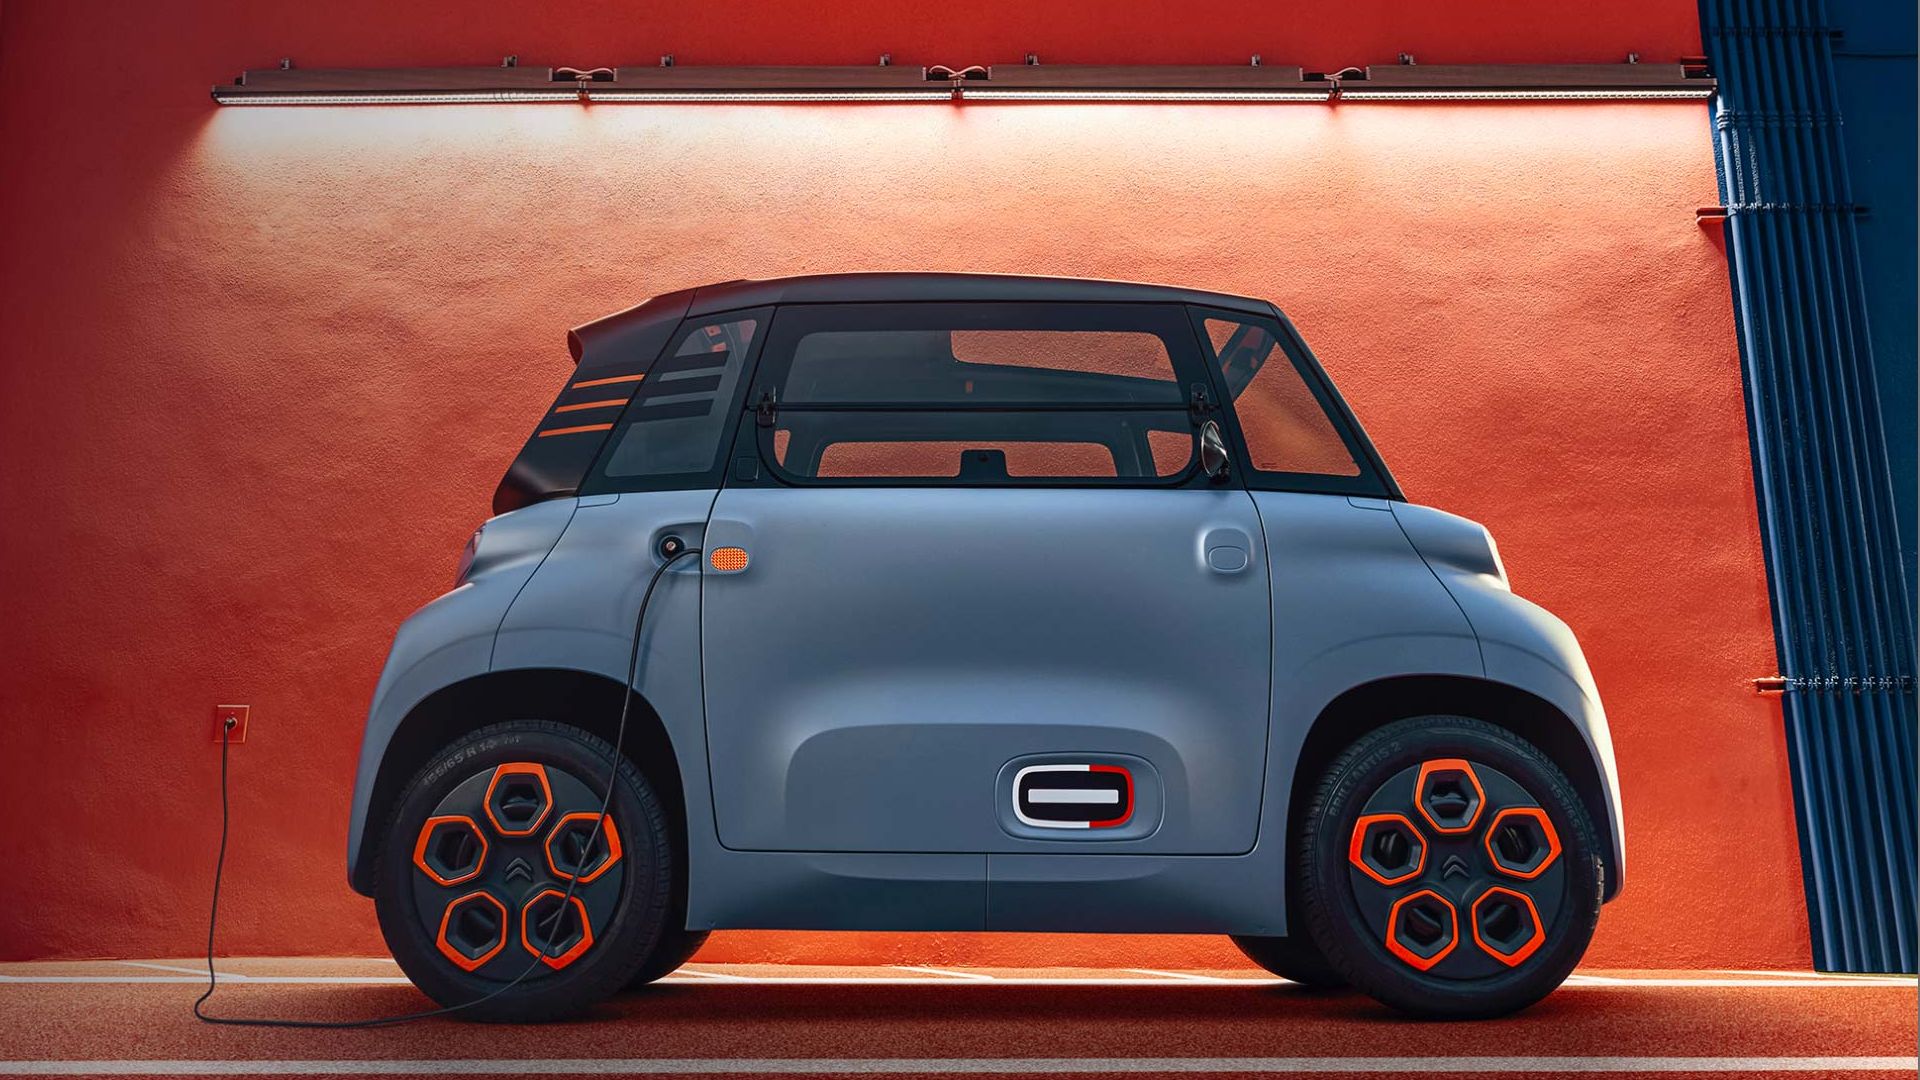 Citroën Is Invading the U.S. with Its Runt, $6,000 Electric “Automobile”